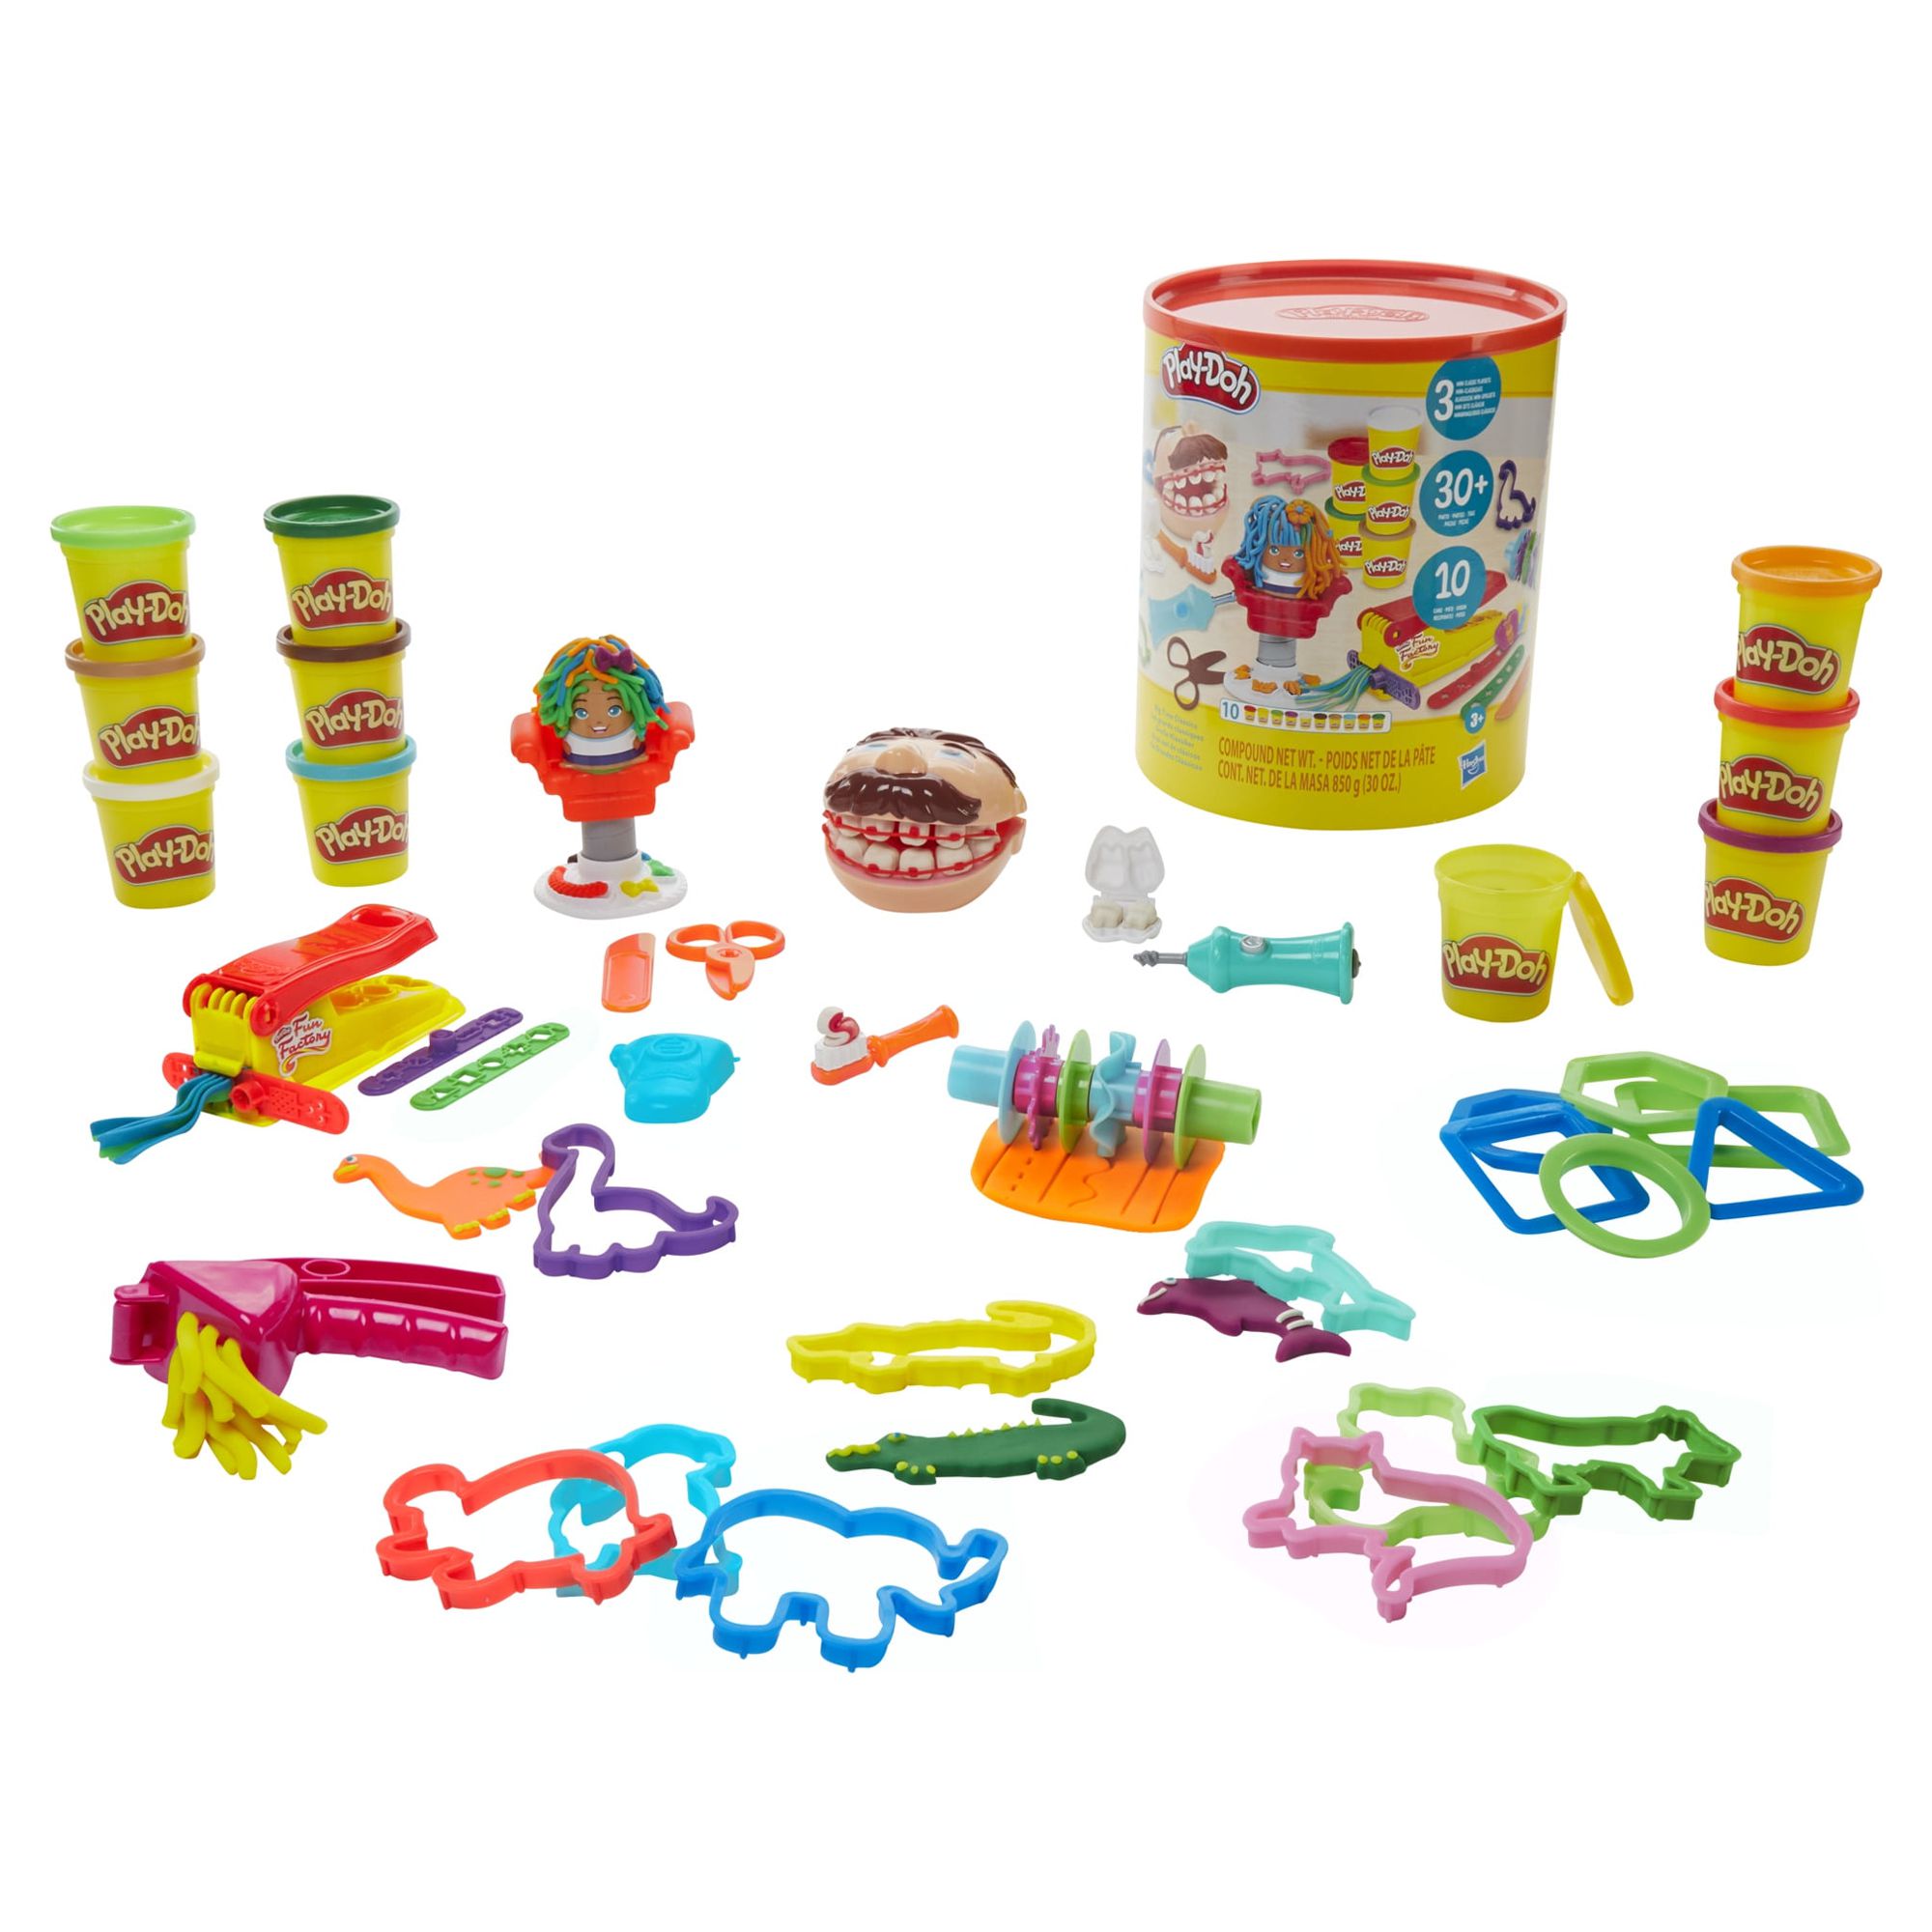 Play-Doh Big Time Classics Canister Bundle of 3 Playsets, 30 Ounces Modeling Compound - image 1 of 11